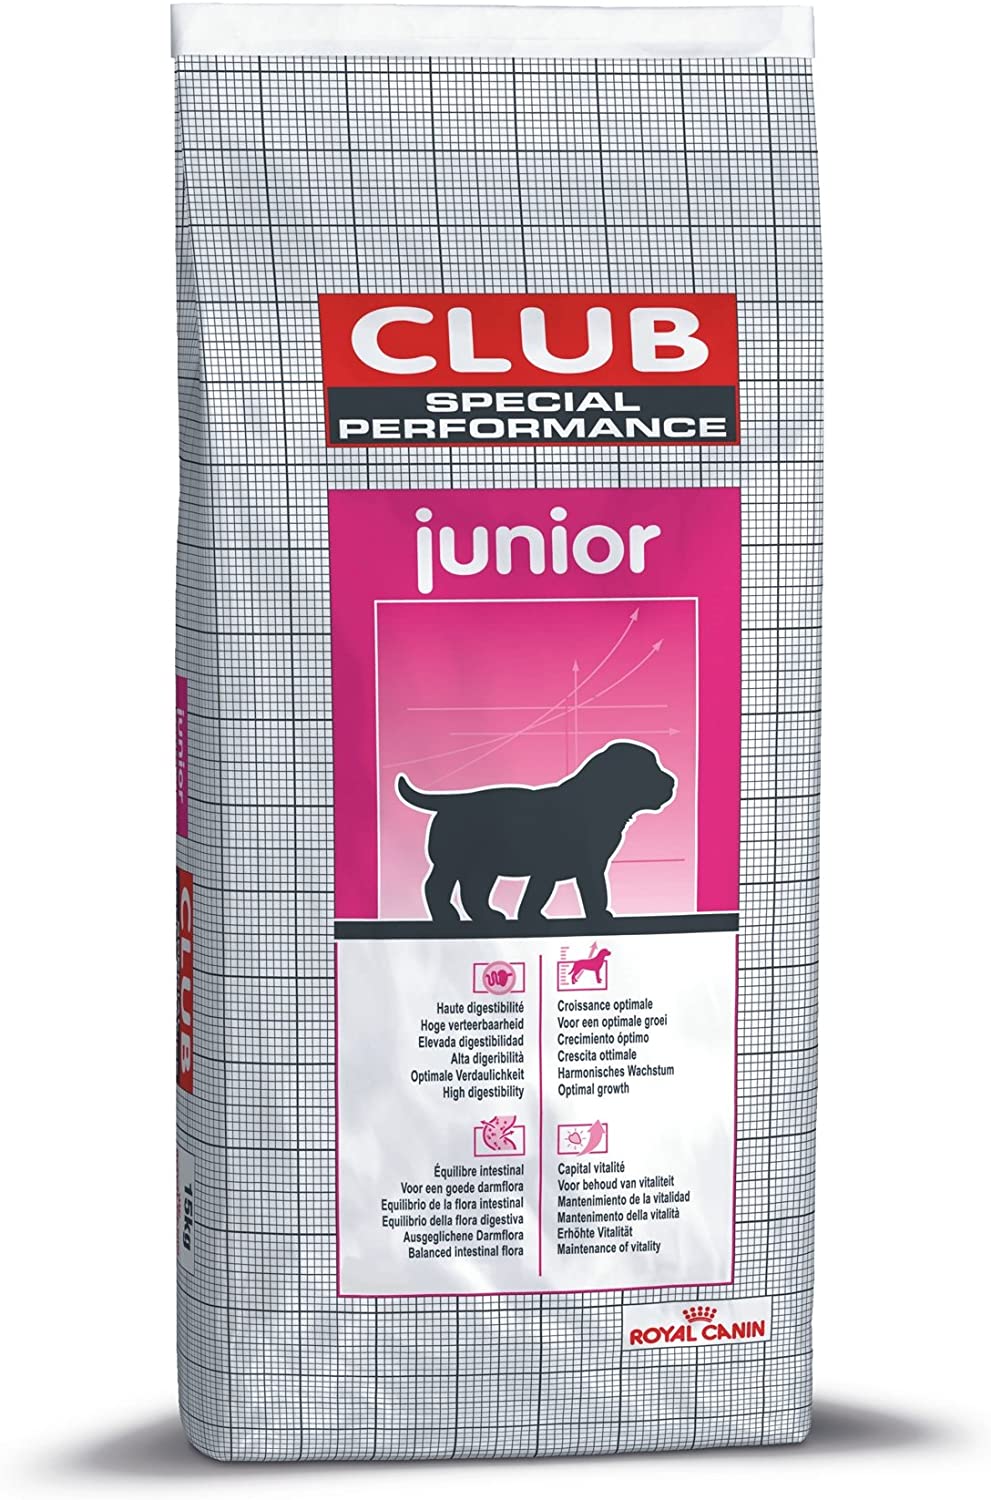  ROYAL CANIN Special Club Performance Junior 